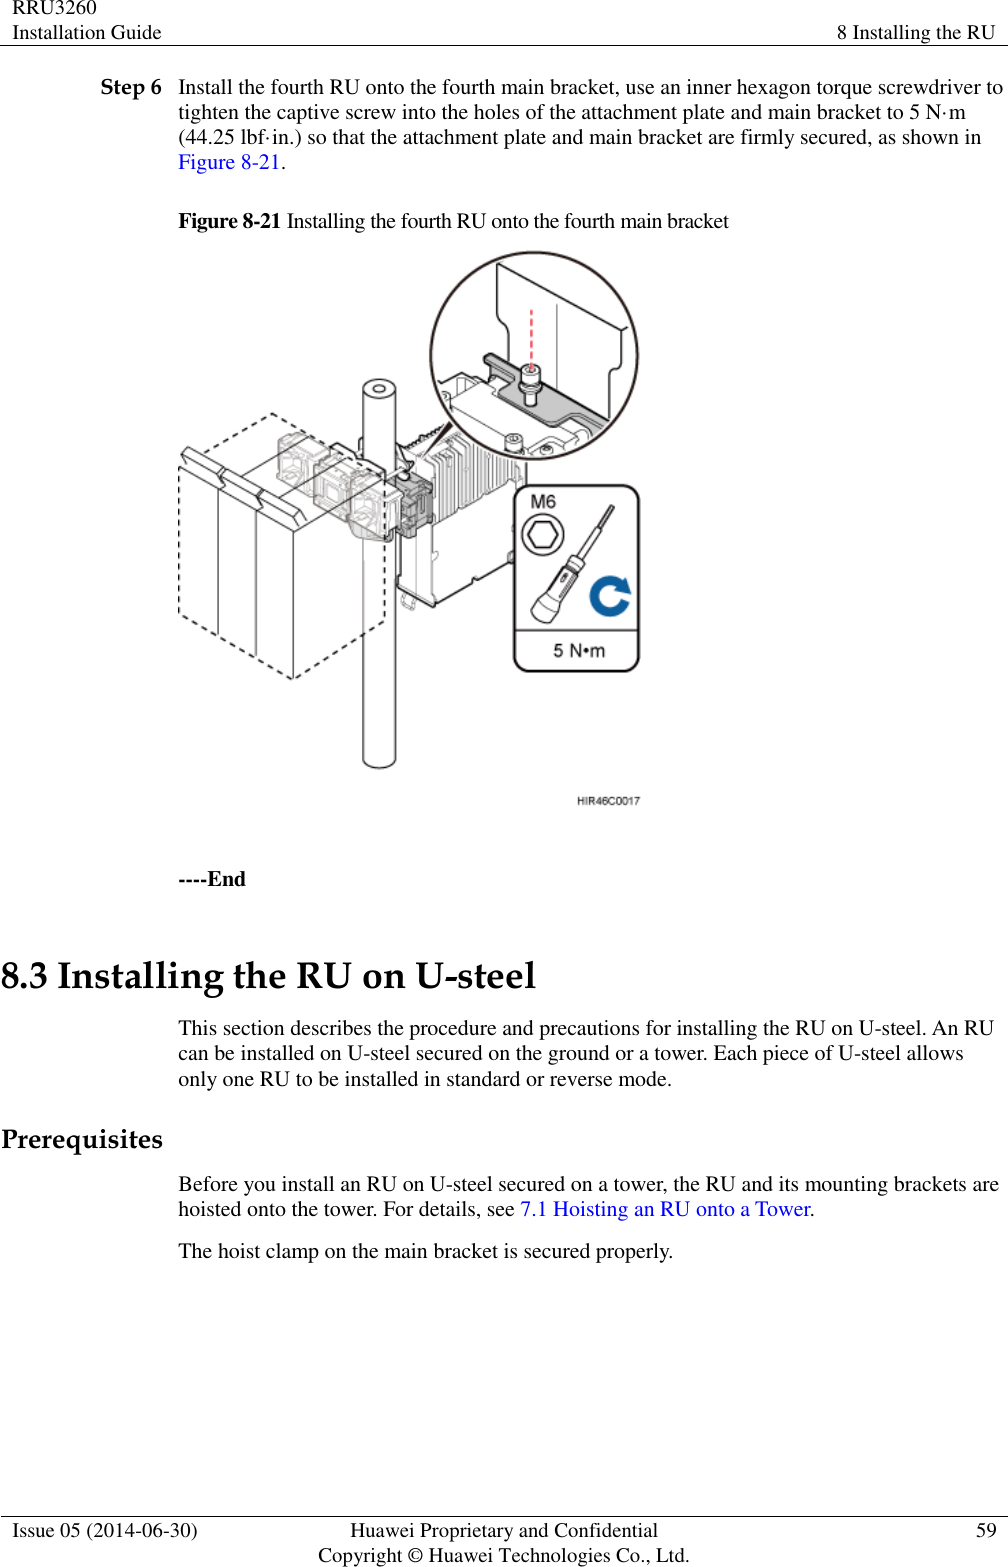 RRU3260 Installation Guide 8 Installing the RU  Issue 05 (2014-06-30) Huawei Proprietary and Confidential                                     Copyright © Huawei Technologies Co., Ltd. 59  Step 6 Install the fourth RU onto the fourth main bracket, use an inner hexagon torque screwdriver to tighten the captive screw into the holes of the attachment plate and main bracket to 5 N·m (44.25 lbf·in.) so that the attachment plate and main bracket are firmly secured, as shown in Figure 8-21. Figure 8-21 Installing the fourth RU onto the fourth main bracket   ----End 8.3 Installing the RU on U-steel This section describes the procedure and precautions for installing the RU on U-steel. An RU can be installed on U-steel secured on the ground or a tower. Each piece of U-steel allows only one RU to be installed in standard or reverse mode. Prerequisites Before you install an RU on U-steel secured on a tower, the RU and its mounting brackets are hoisted onto the tower. For details, see 7.1 Hoisting an RU onto a Tower. The hoist clamp on the main bracket is secured properly.  